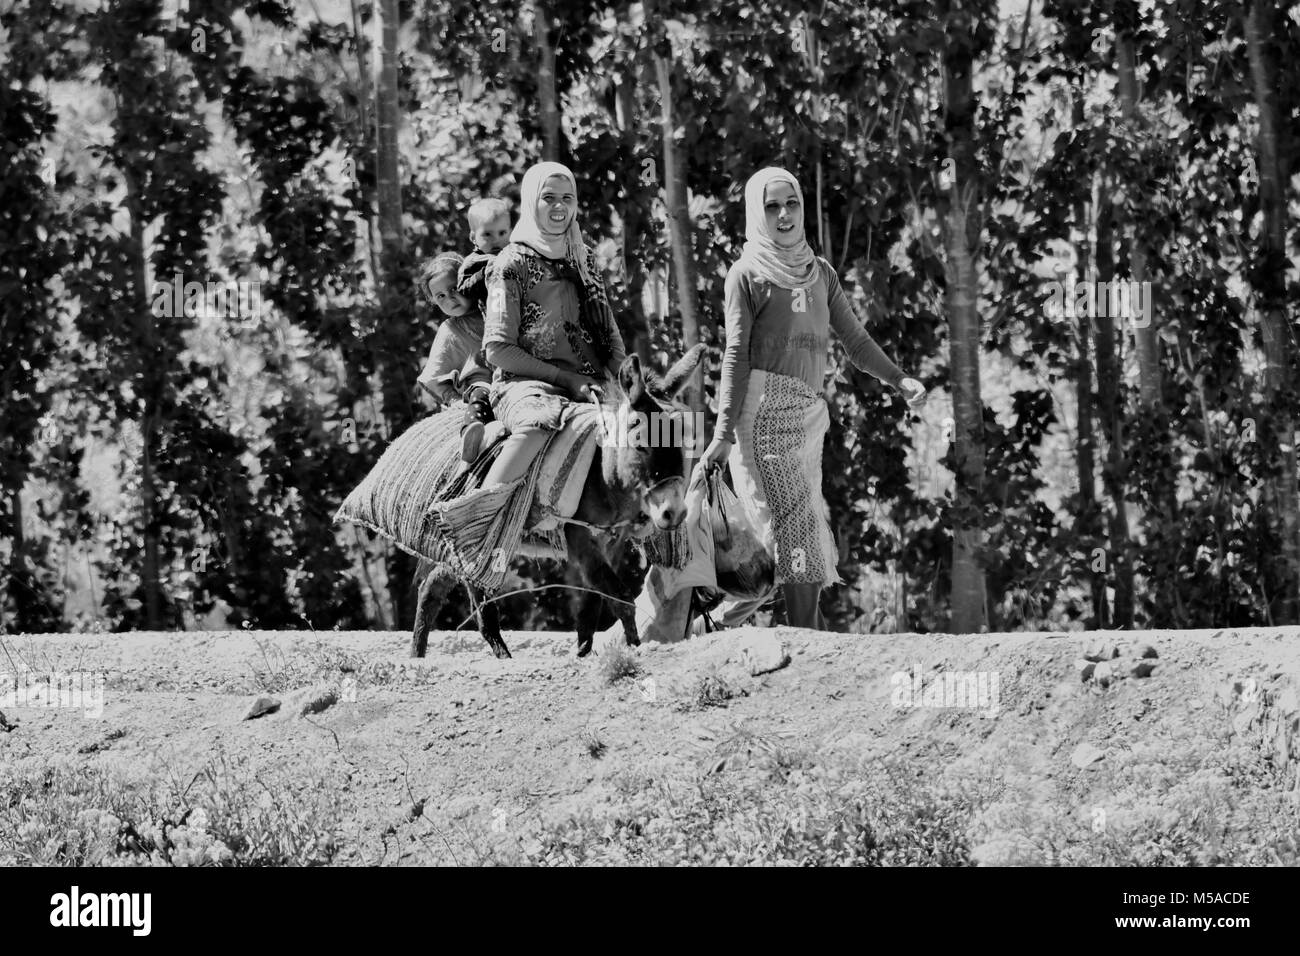 North Africa, Africa, African, Morocco, Moroccan, local women on donkey, North Africa, Africa, African Stock Photo